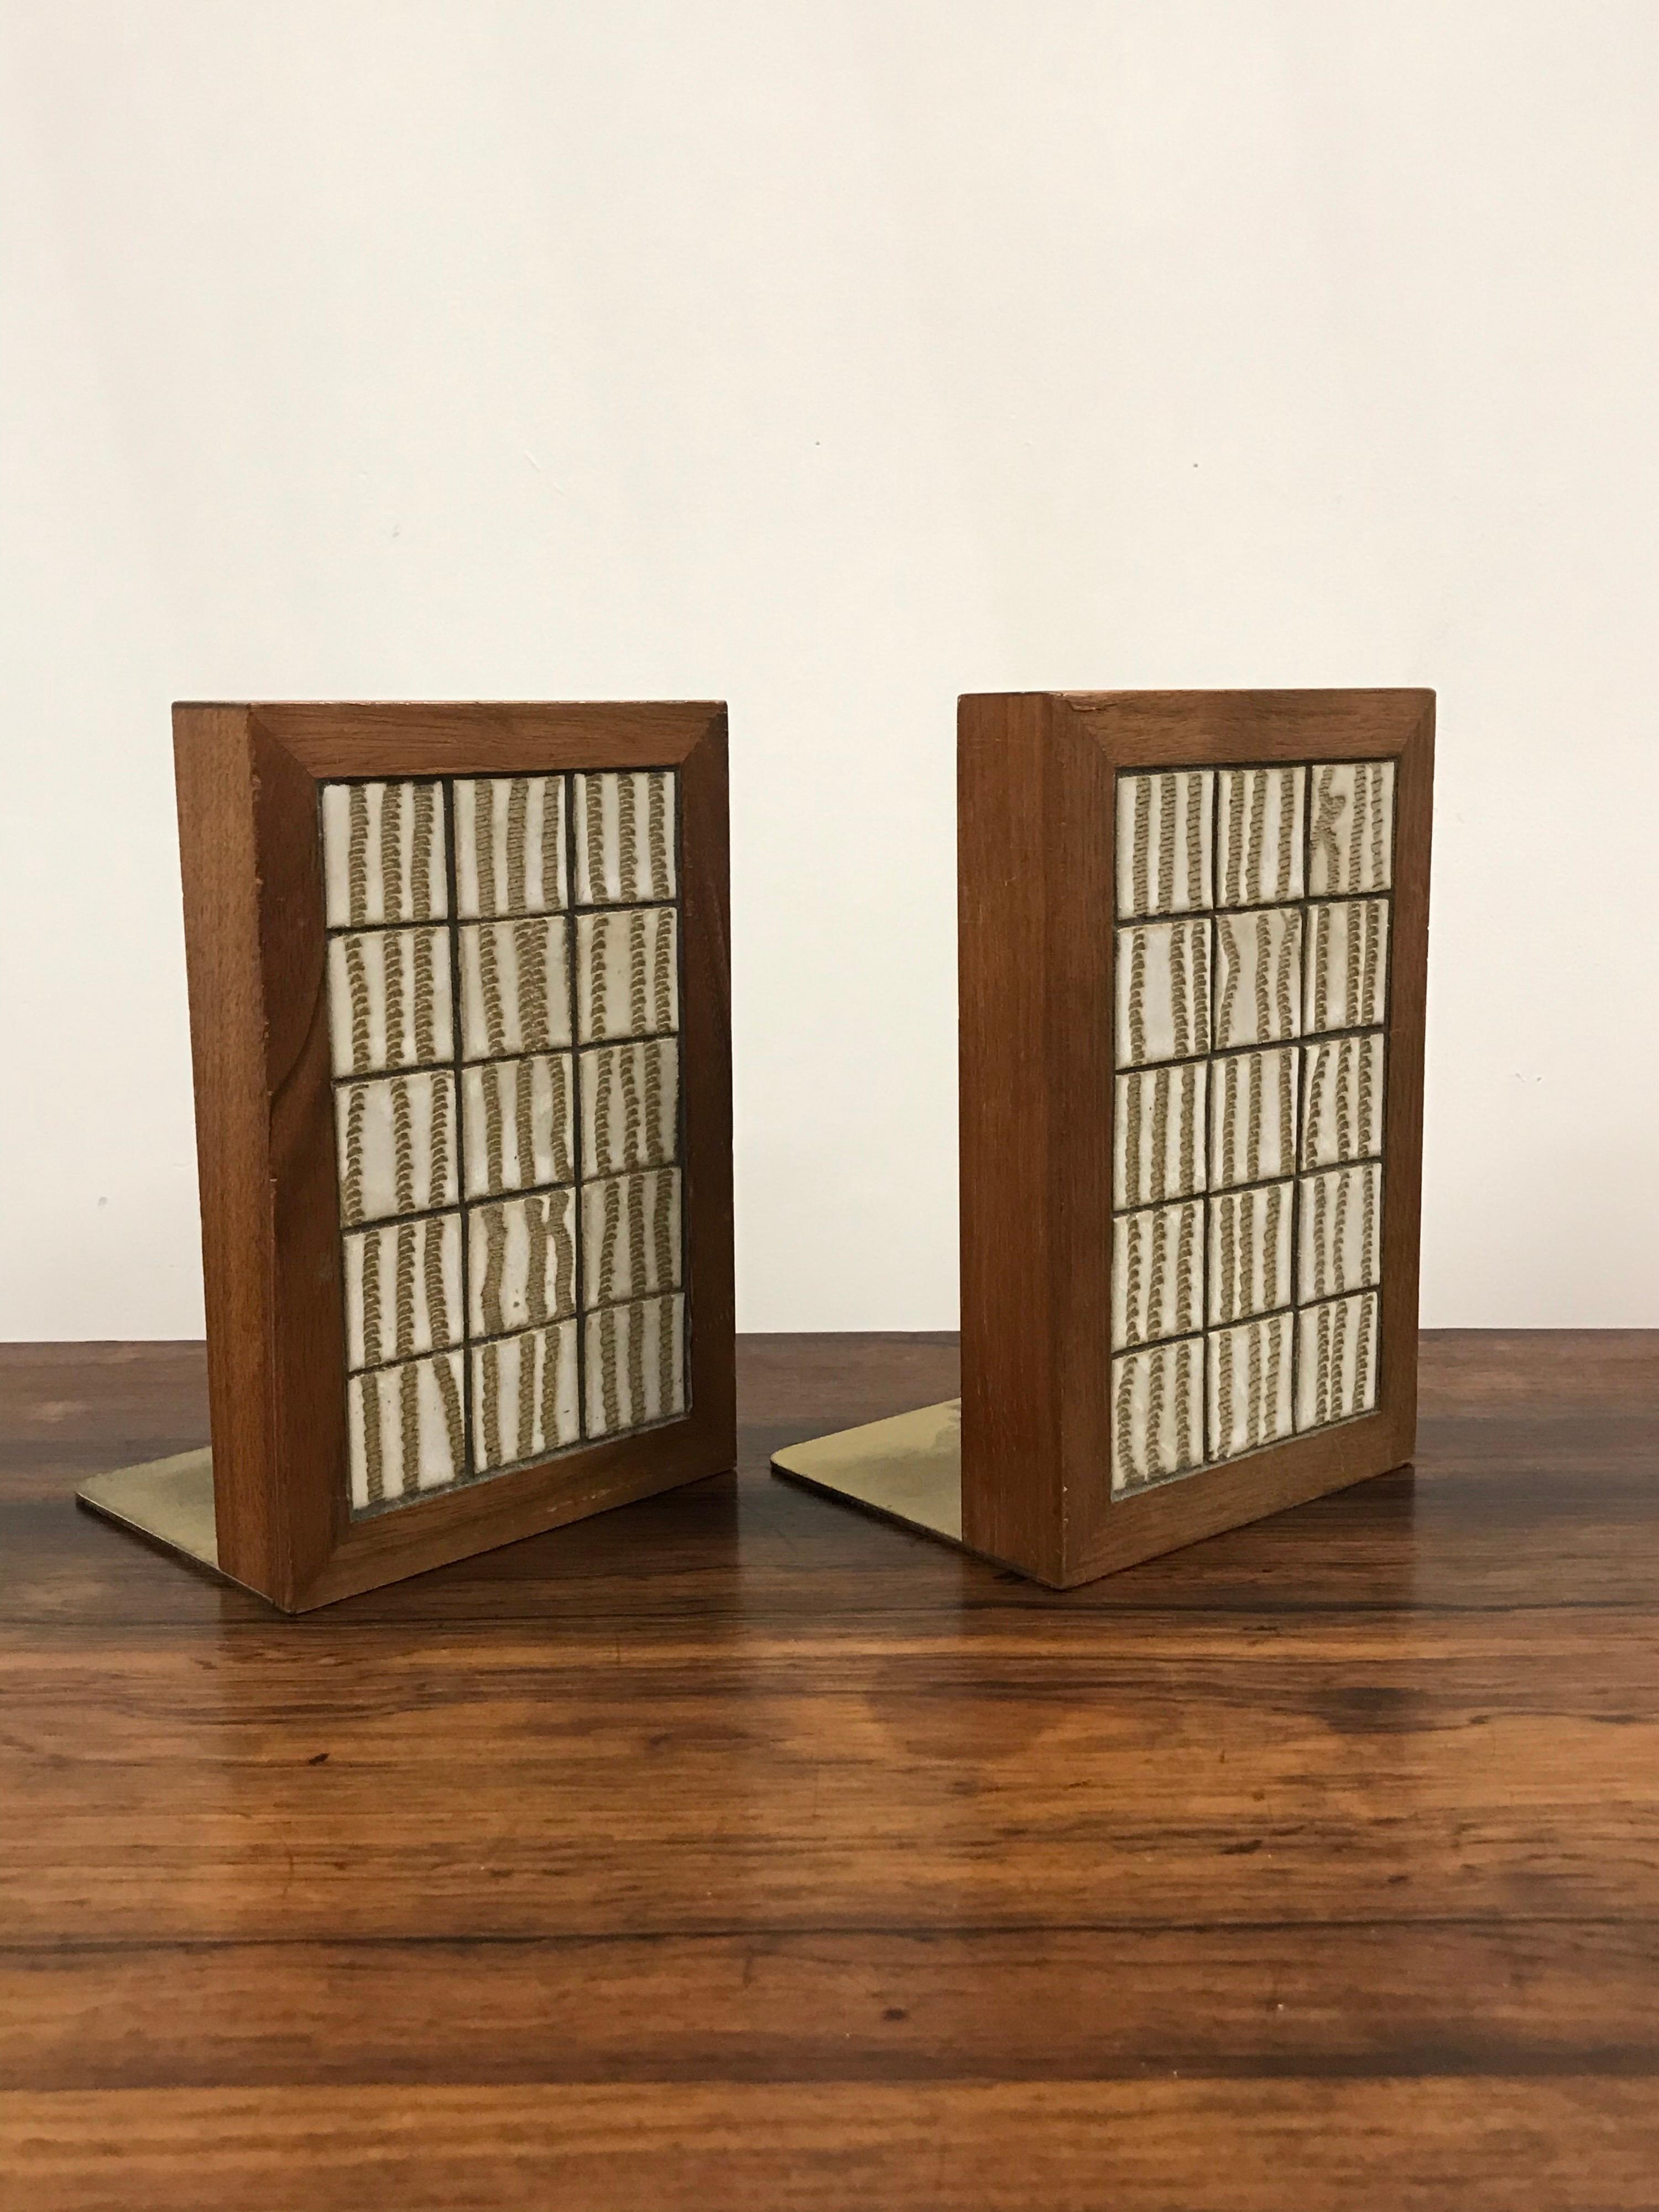 Beautiful pair of bookends by famed ceramicists Gordon and Jane Martz for their studio, Marshall Studios. Walnut construction with tile inlay. Very good vintage condition. 

Listed depth is 1.125 which is wood only. Overall depth is 4.25.